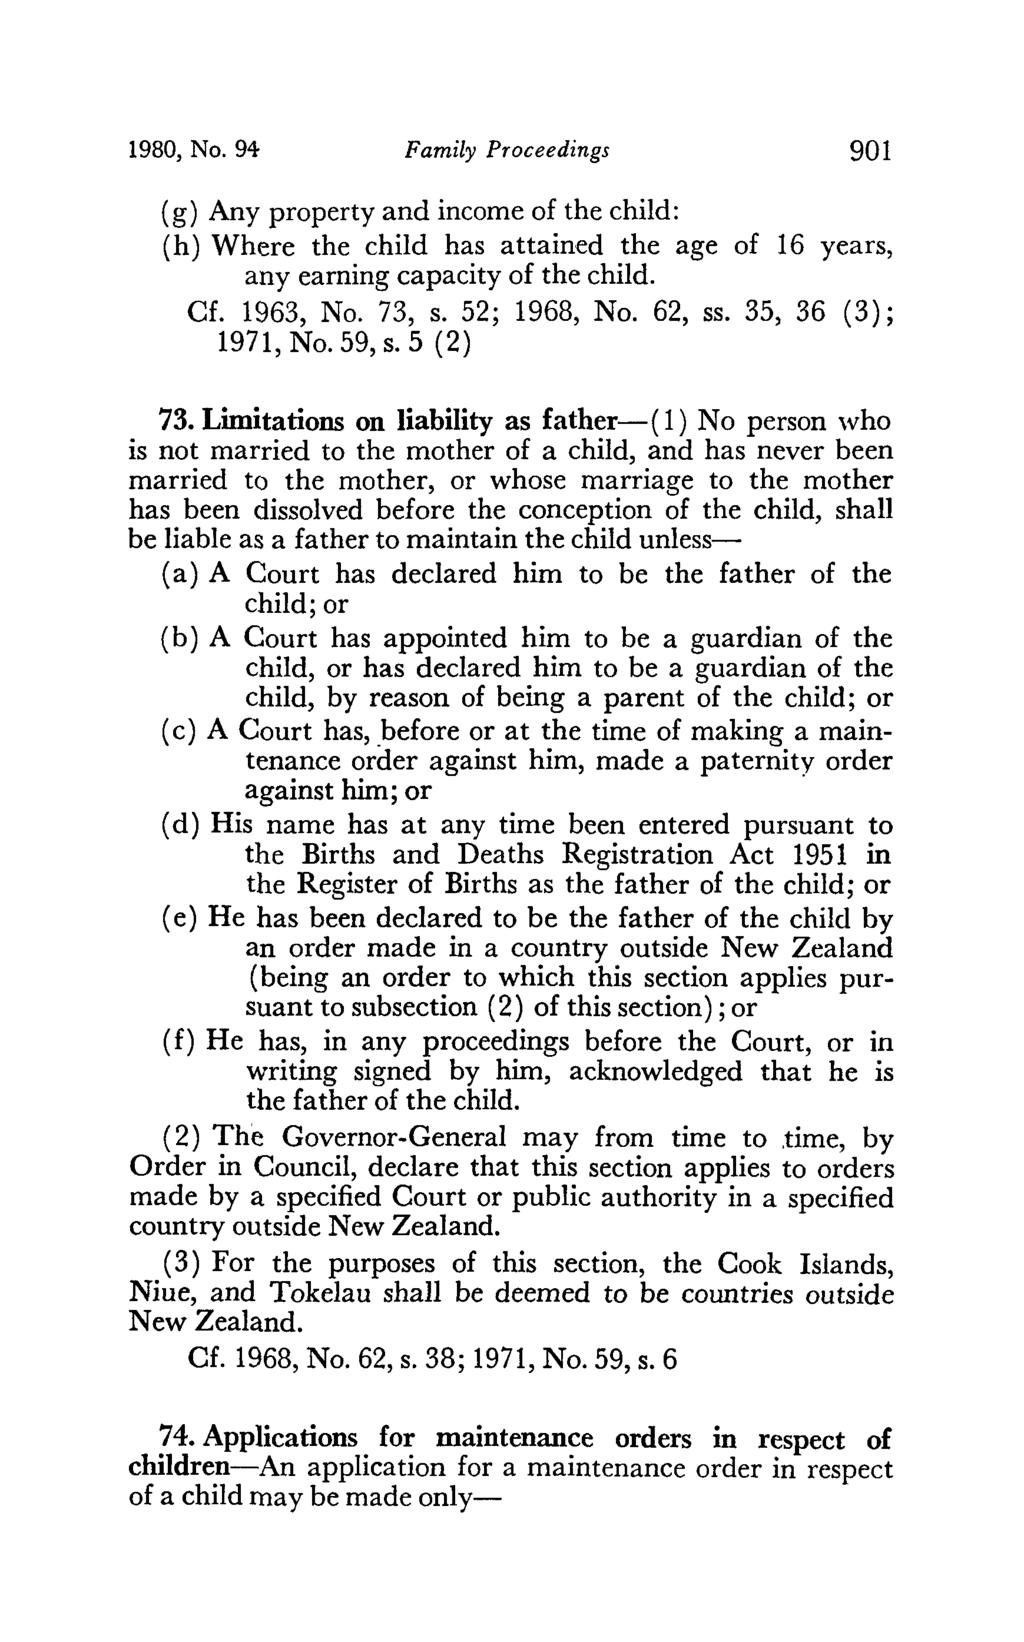 1980, No. 94 Family Proceedings 901 (g) Any property and income of the child: (h) Where the child has attained the age of 16 years, any earning capacity of the child. Cf. 1963, No. 73, s.